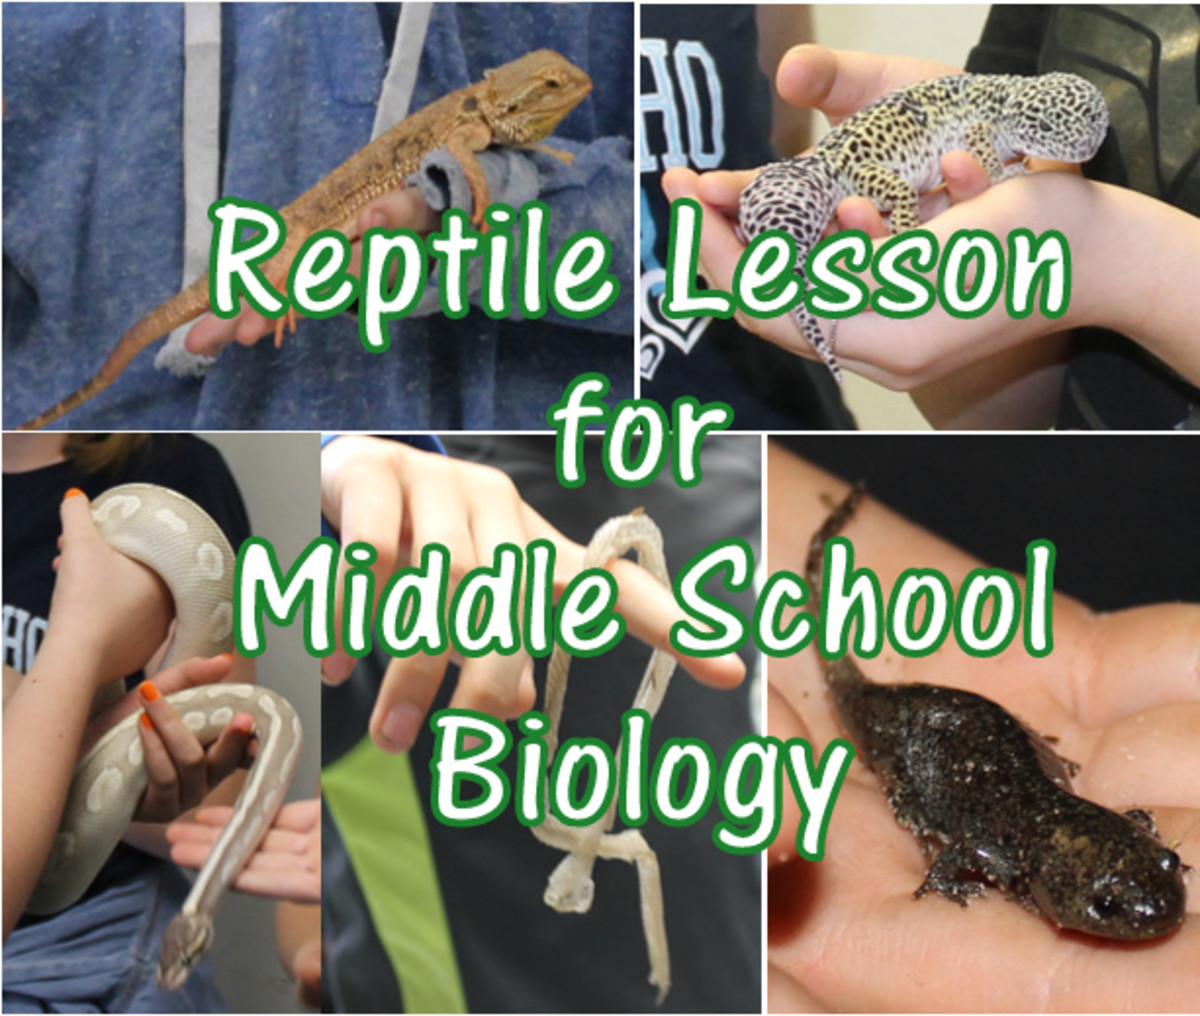 Reptiles Lesson Plan for Middle School Biology